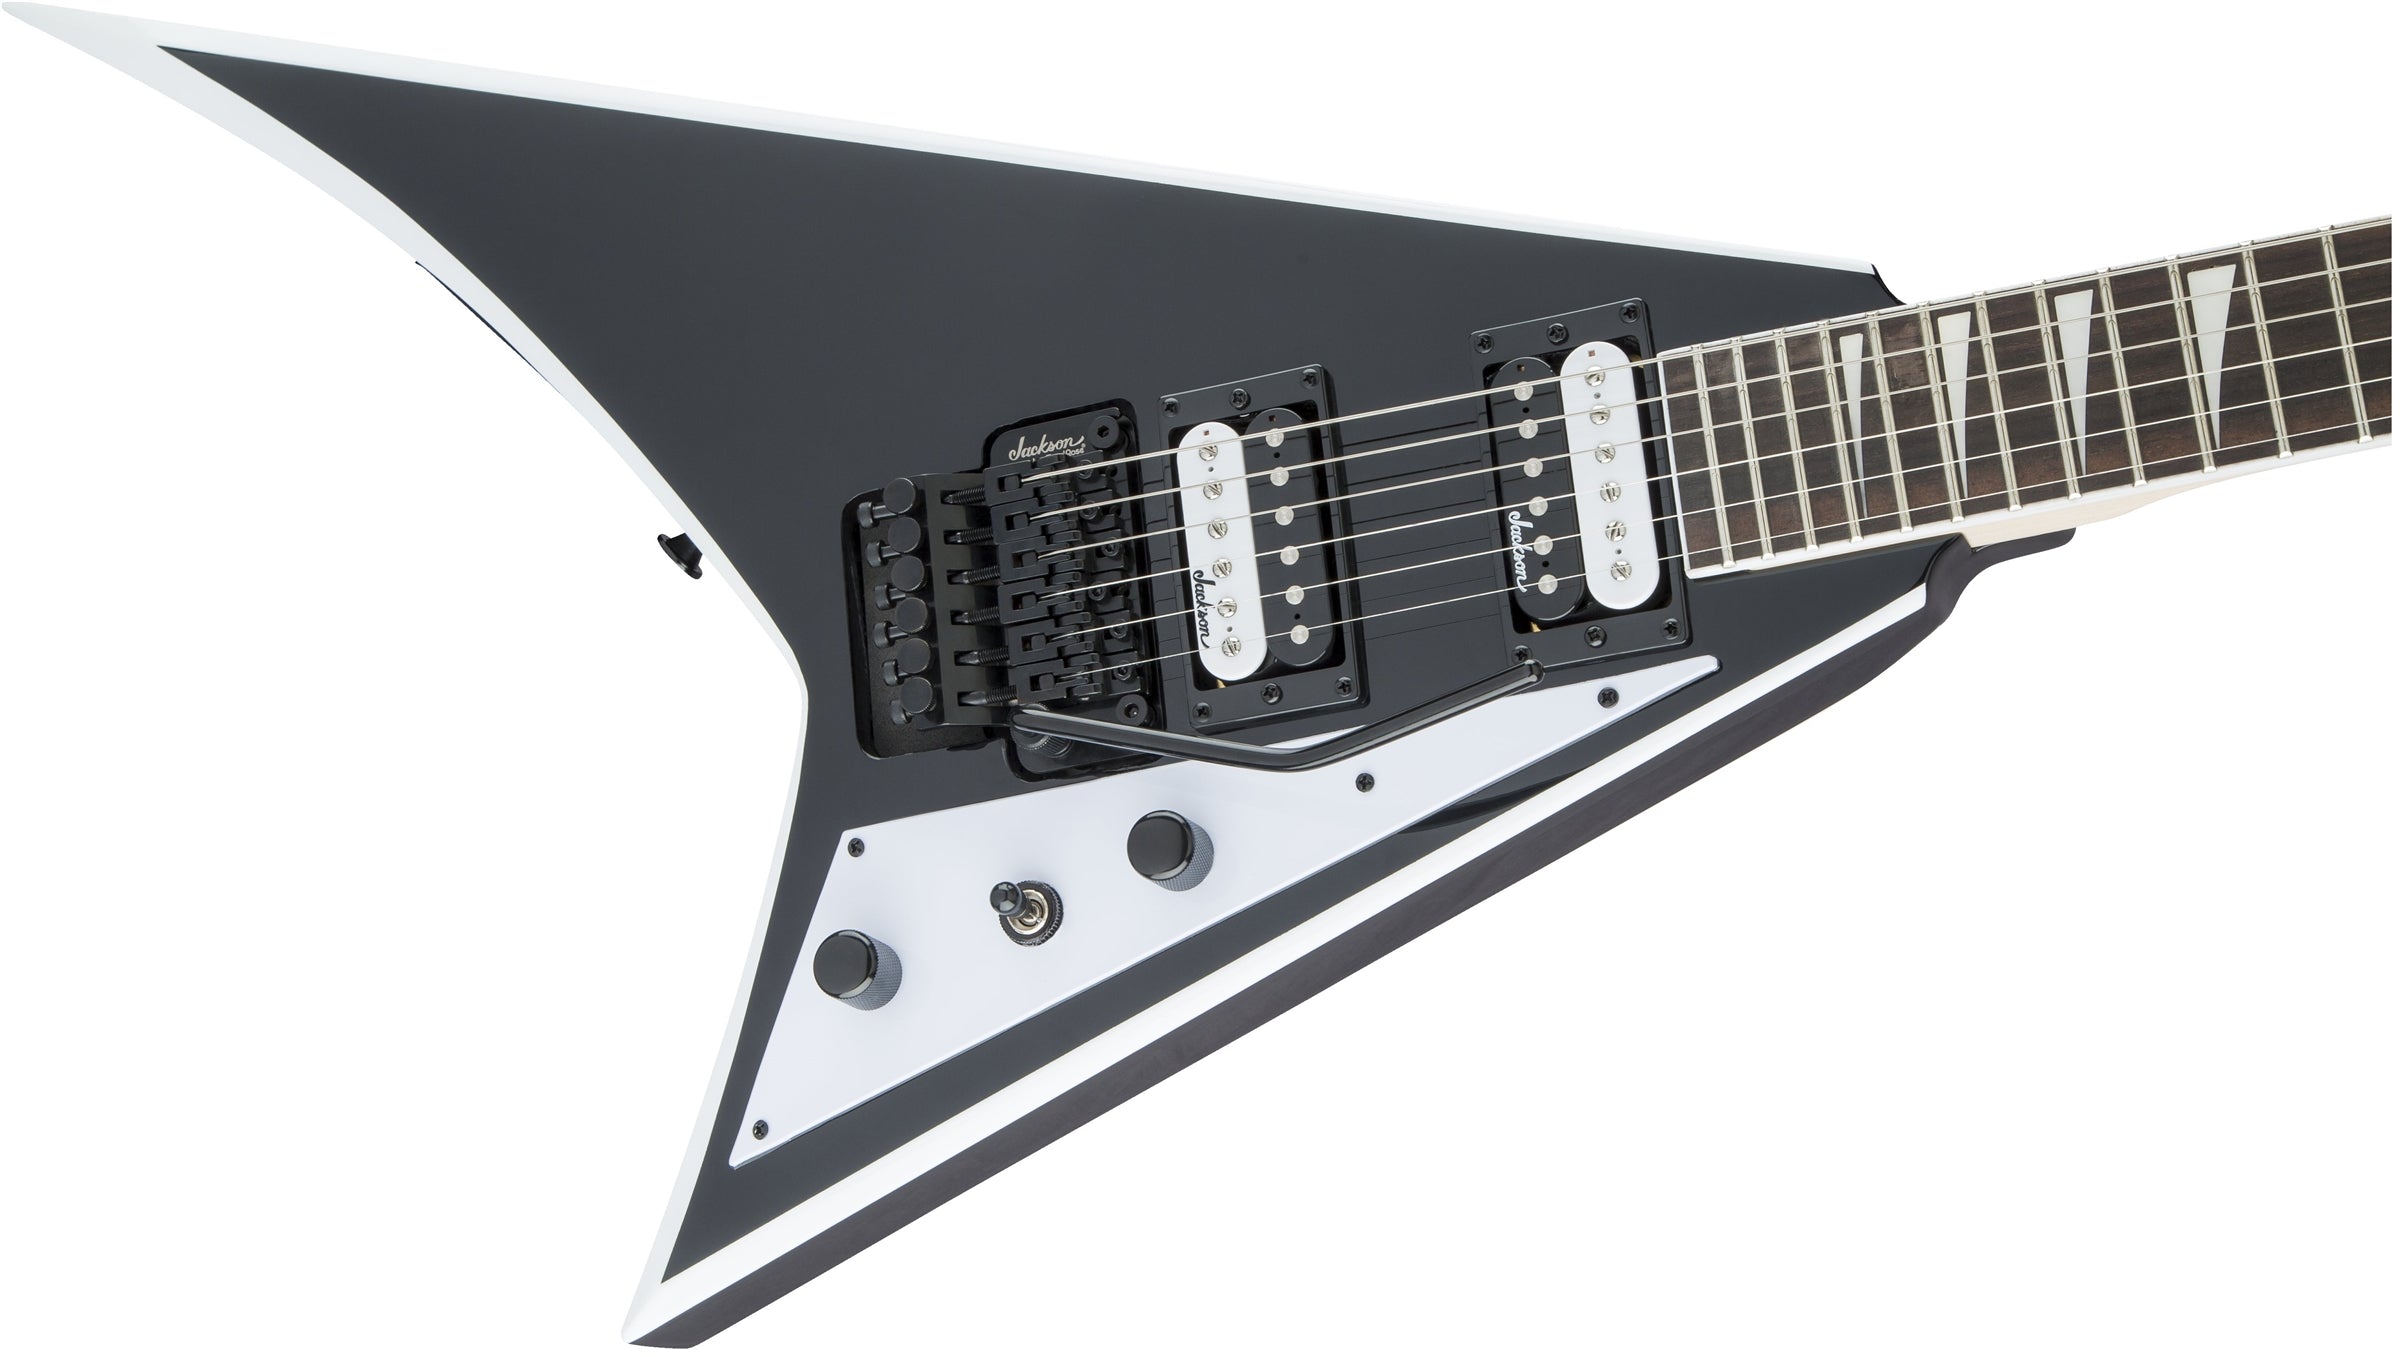 Jackson Rhoads Js32 Electric Guitar - Black With White Bevels